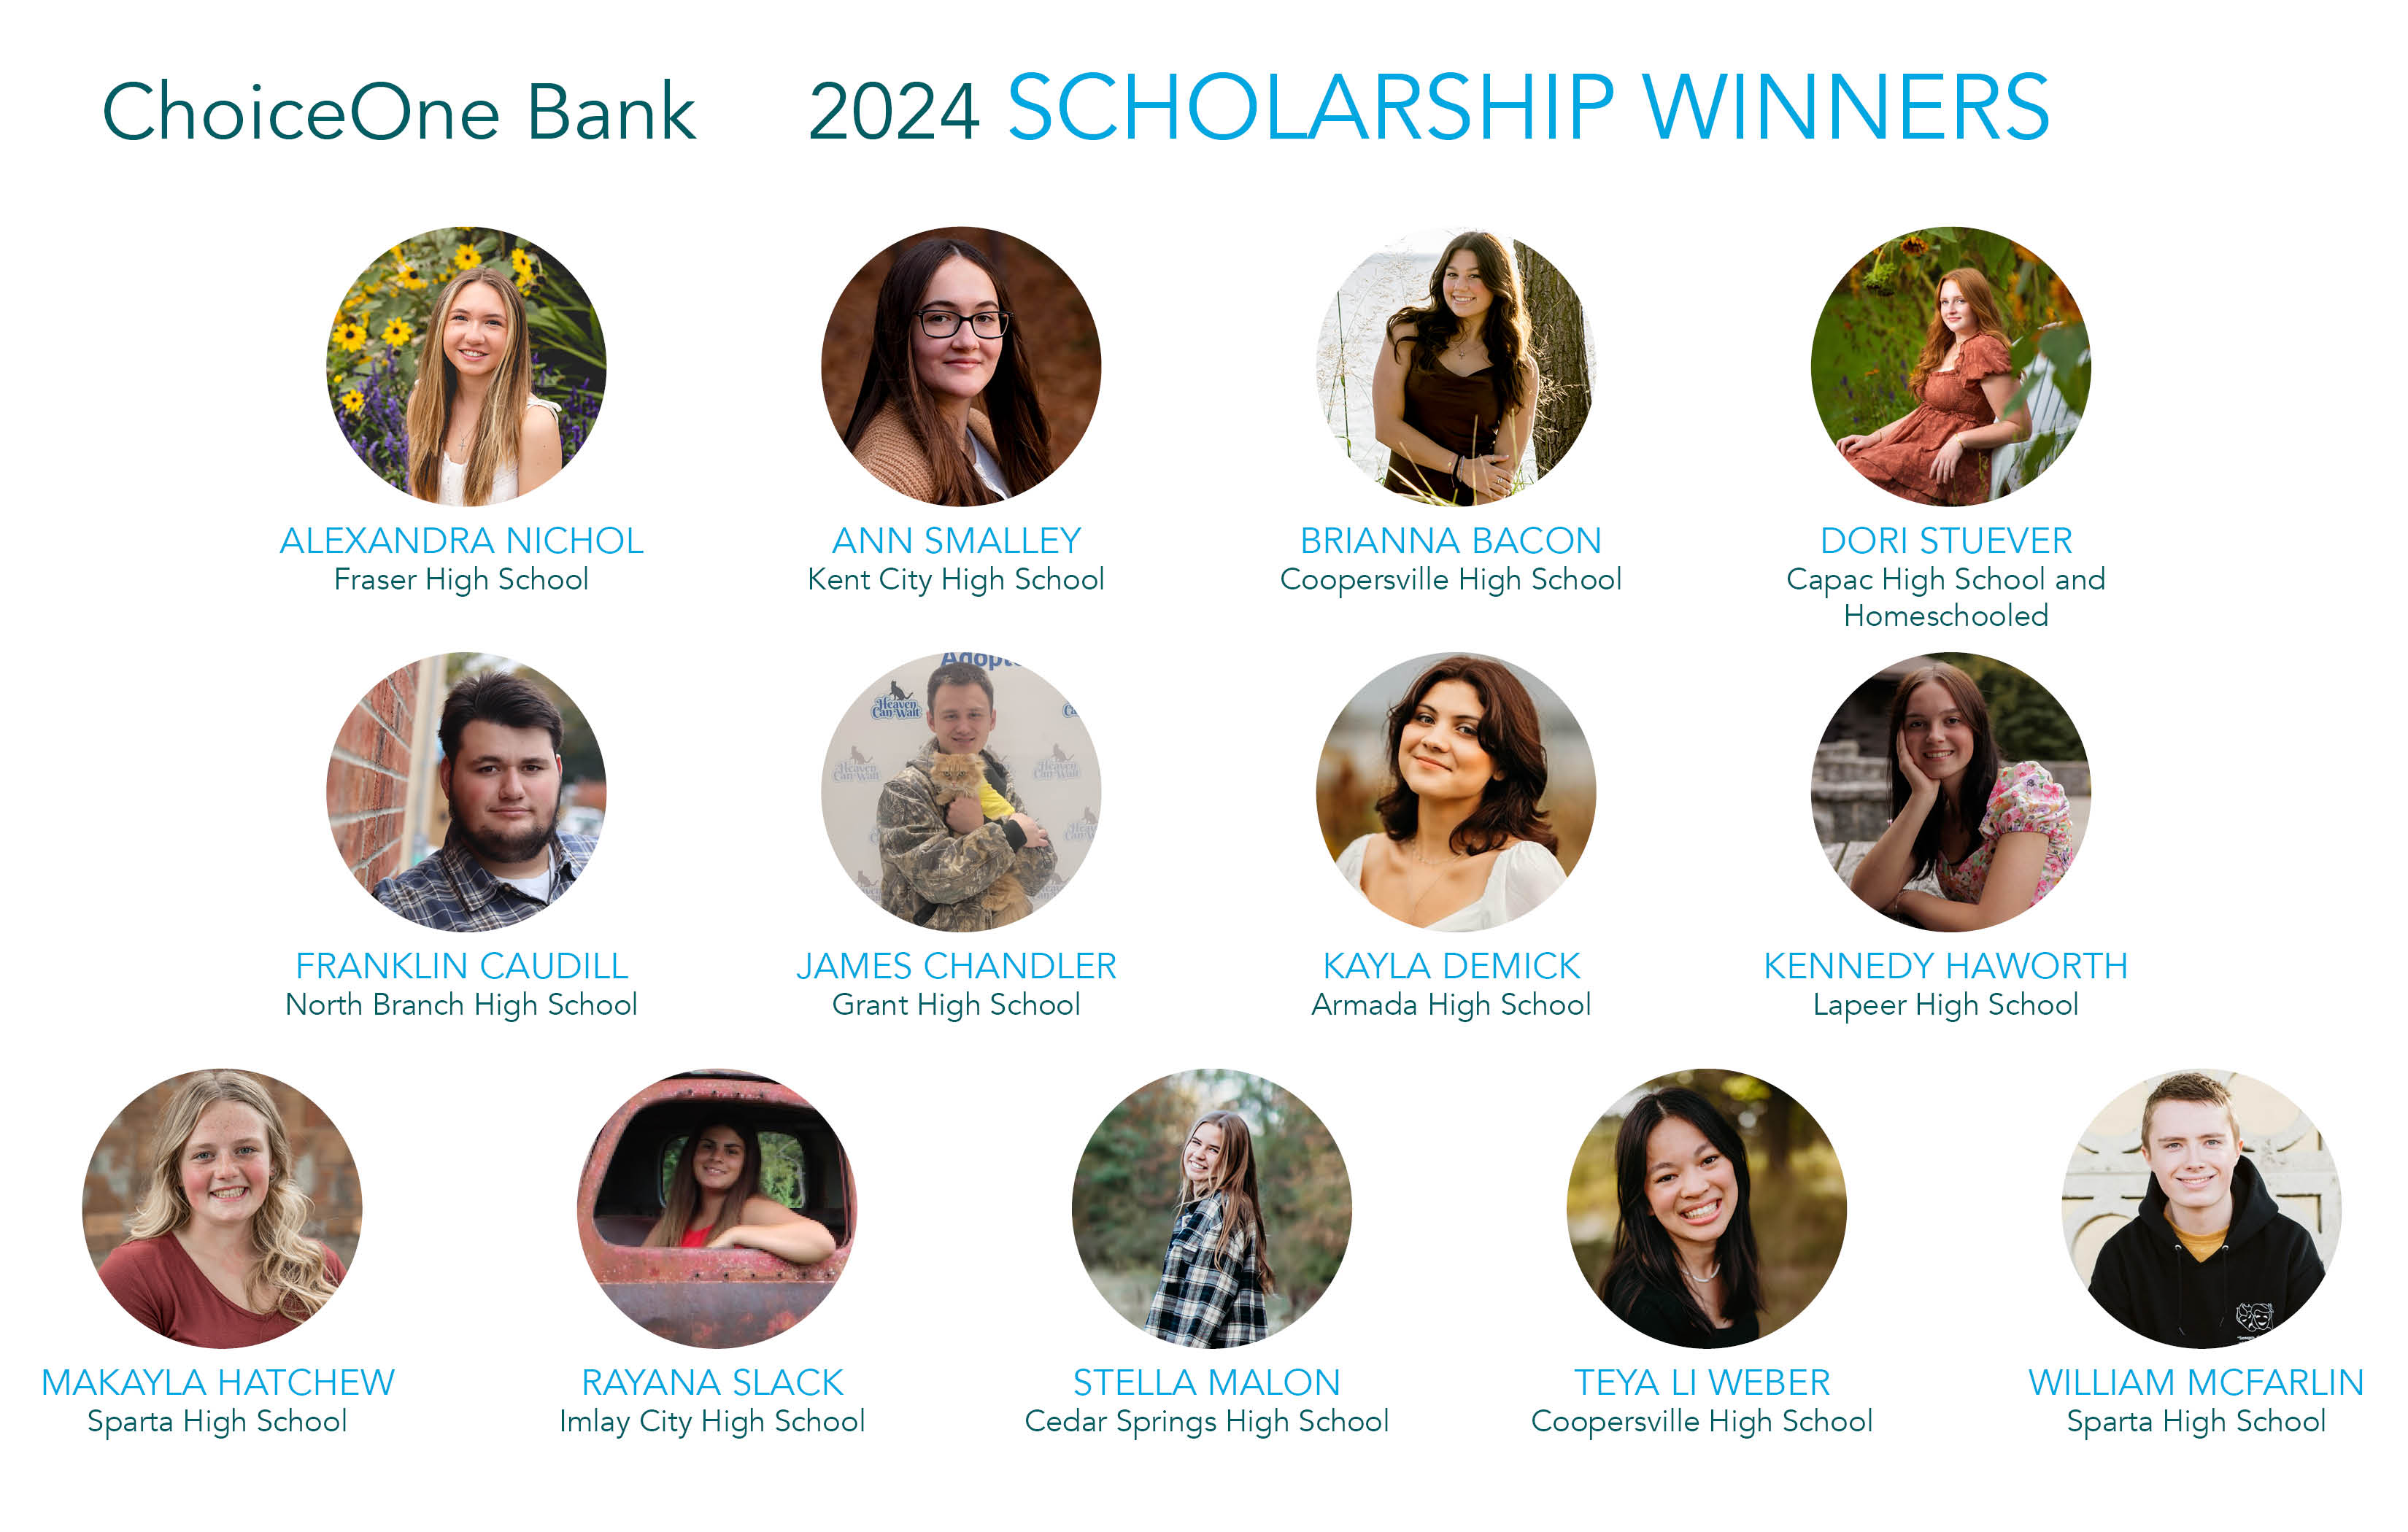 2024 choiceone bank scholarship winners with no names listed 